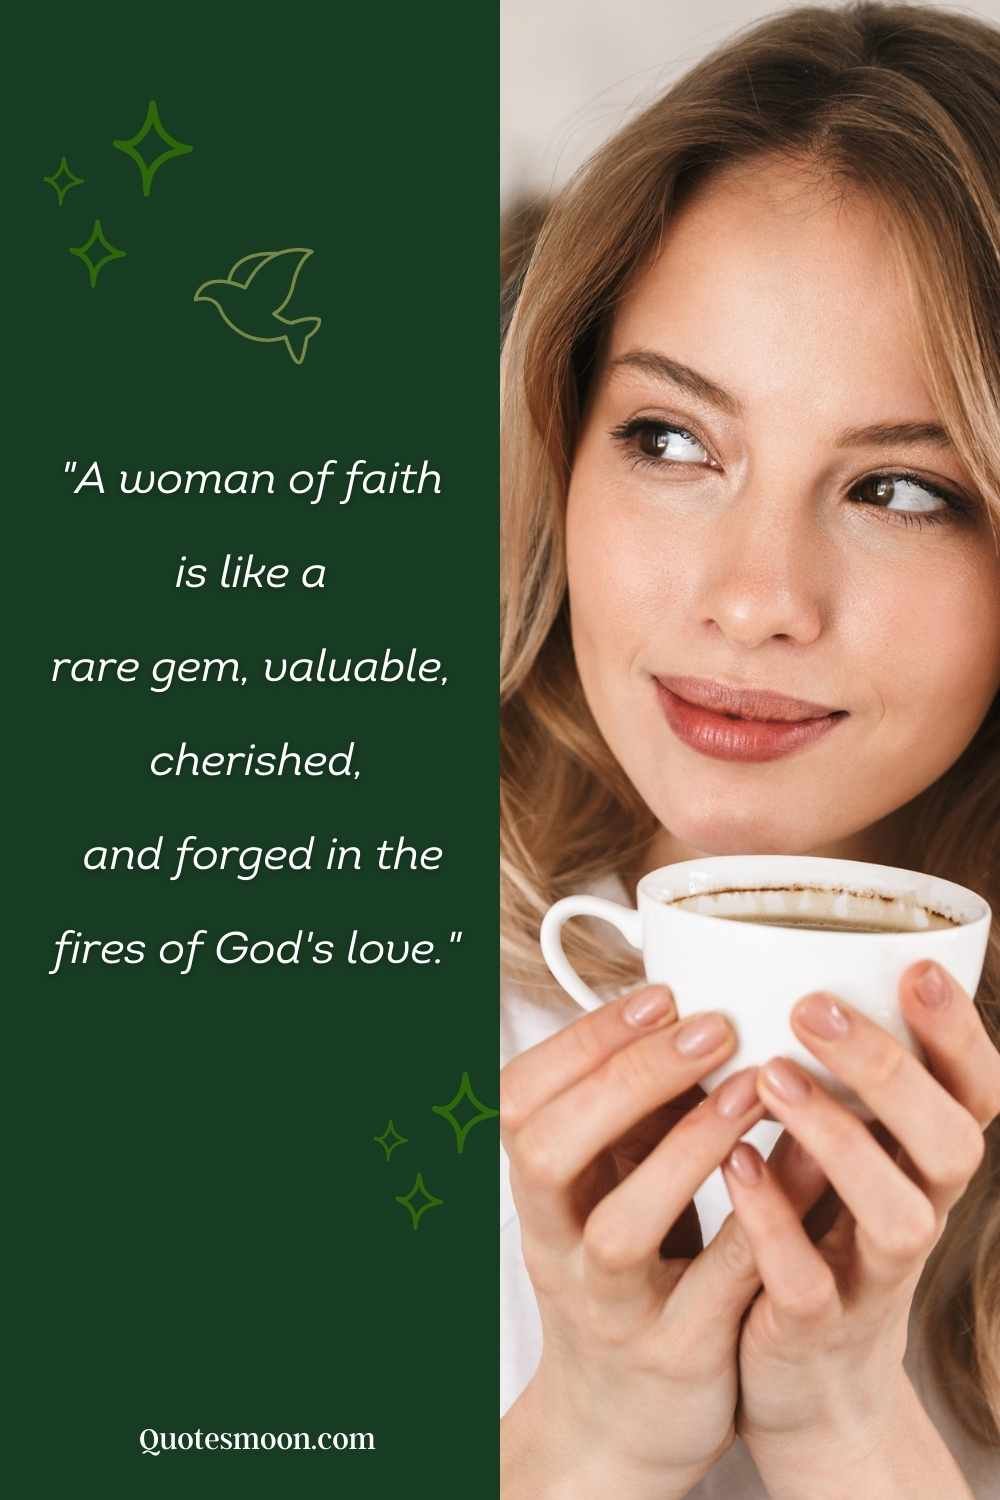 Christian Quotes To Uplift Women's Spirit images